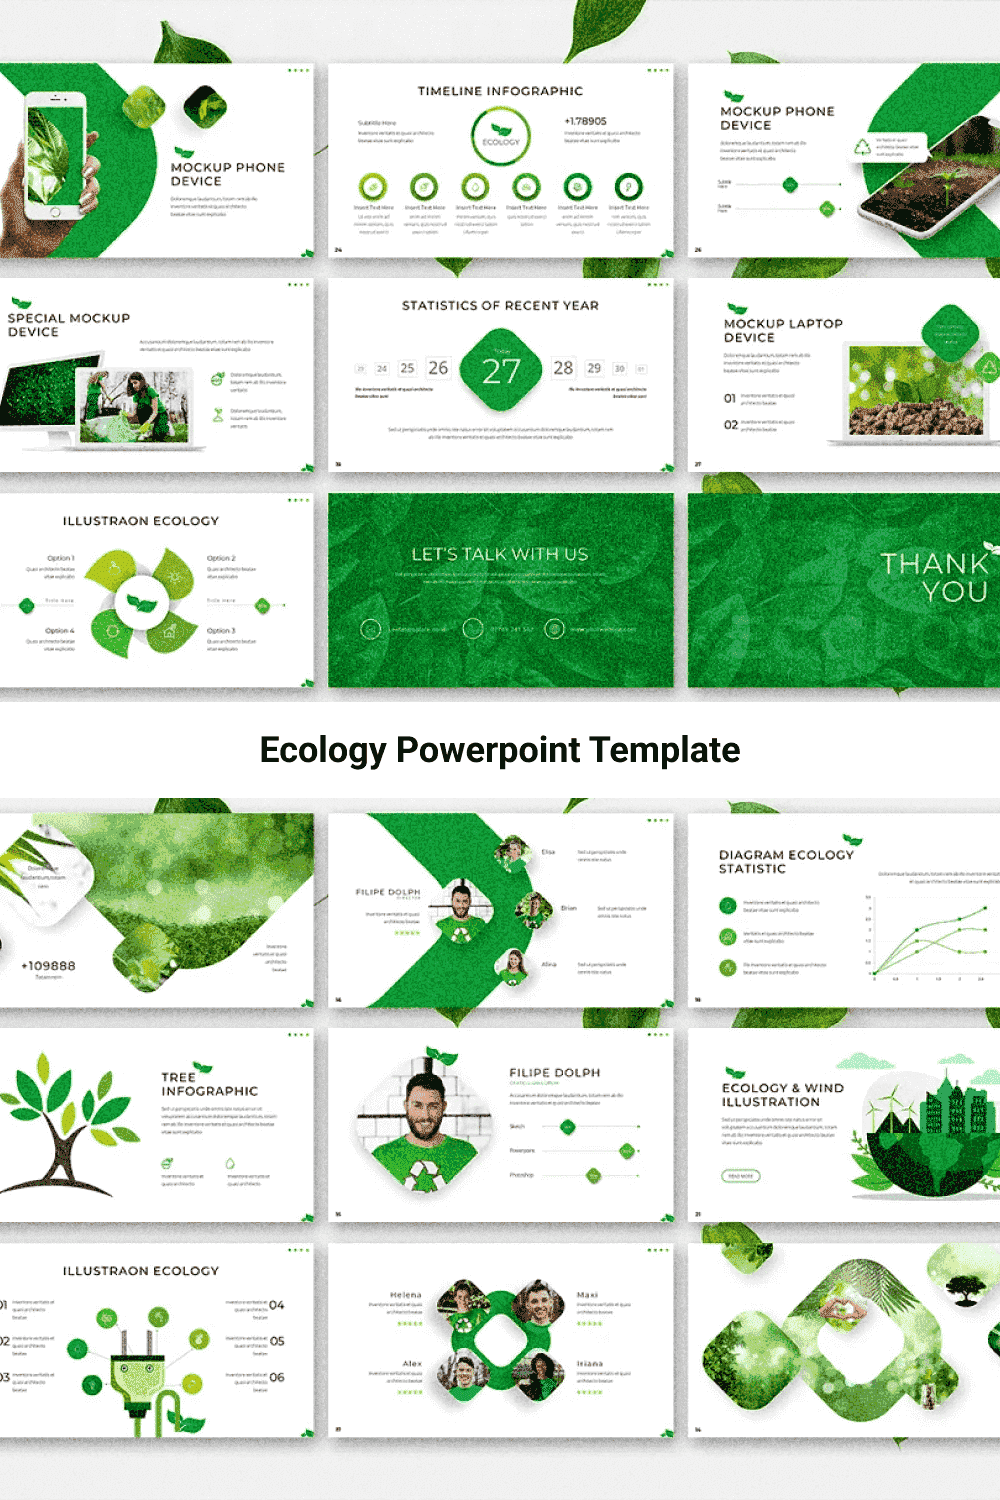 Ecology - Powerpoint Template - "Let's Talk With Us".